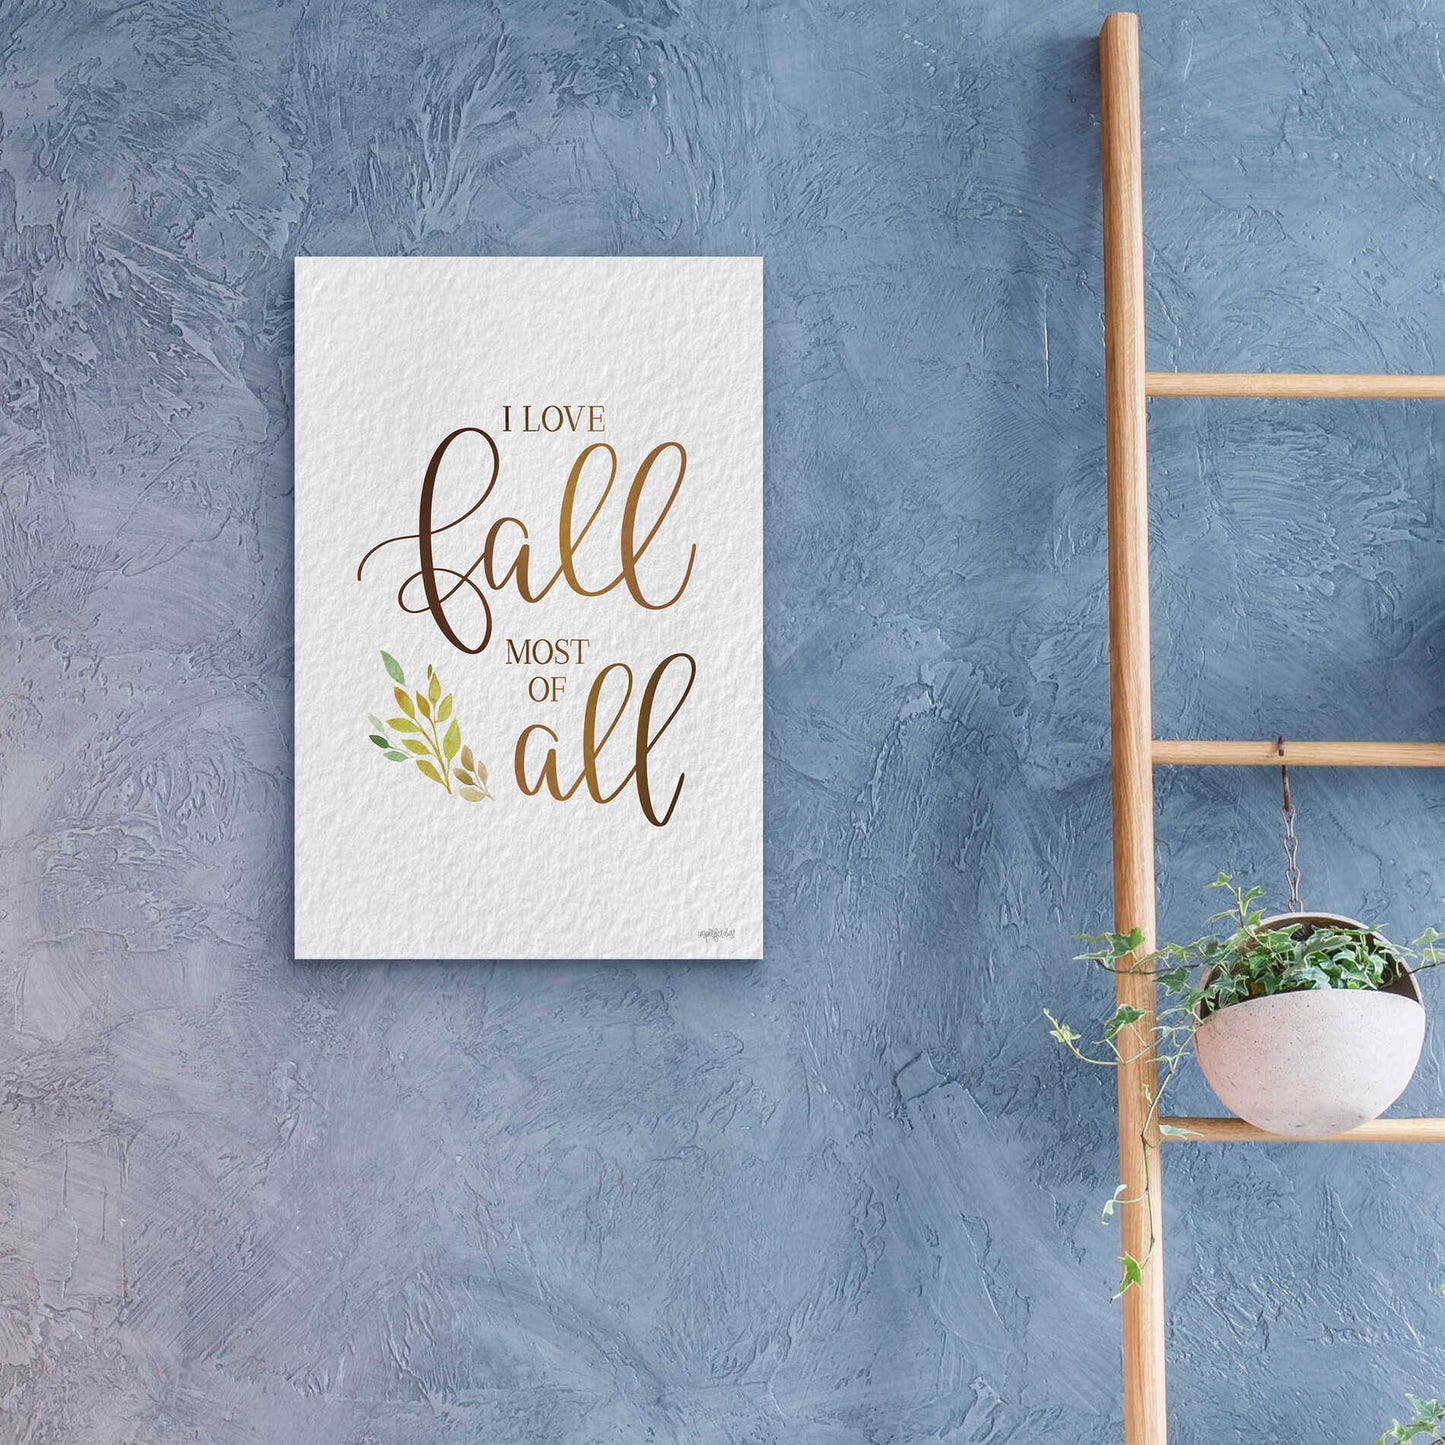 Epic Art 'I Love Fall Most of All' by Imperfect Dust, Acrylic Glass Wall Art,16x24